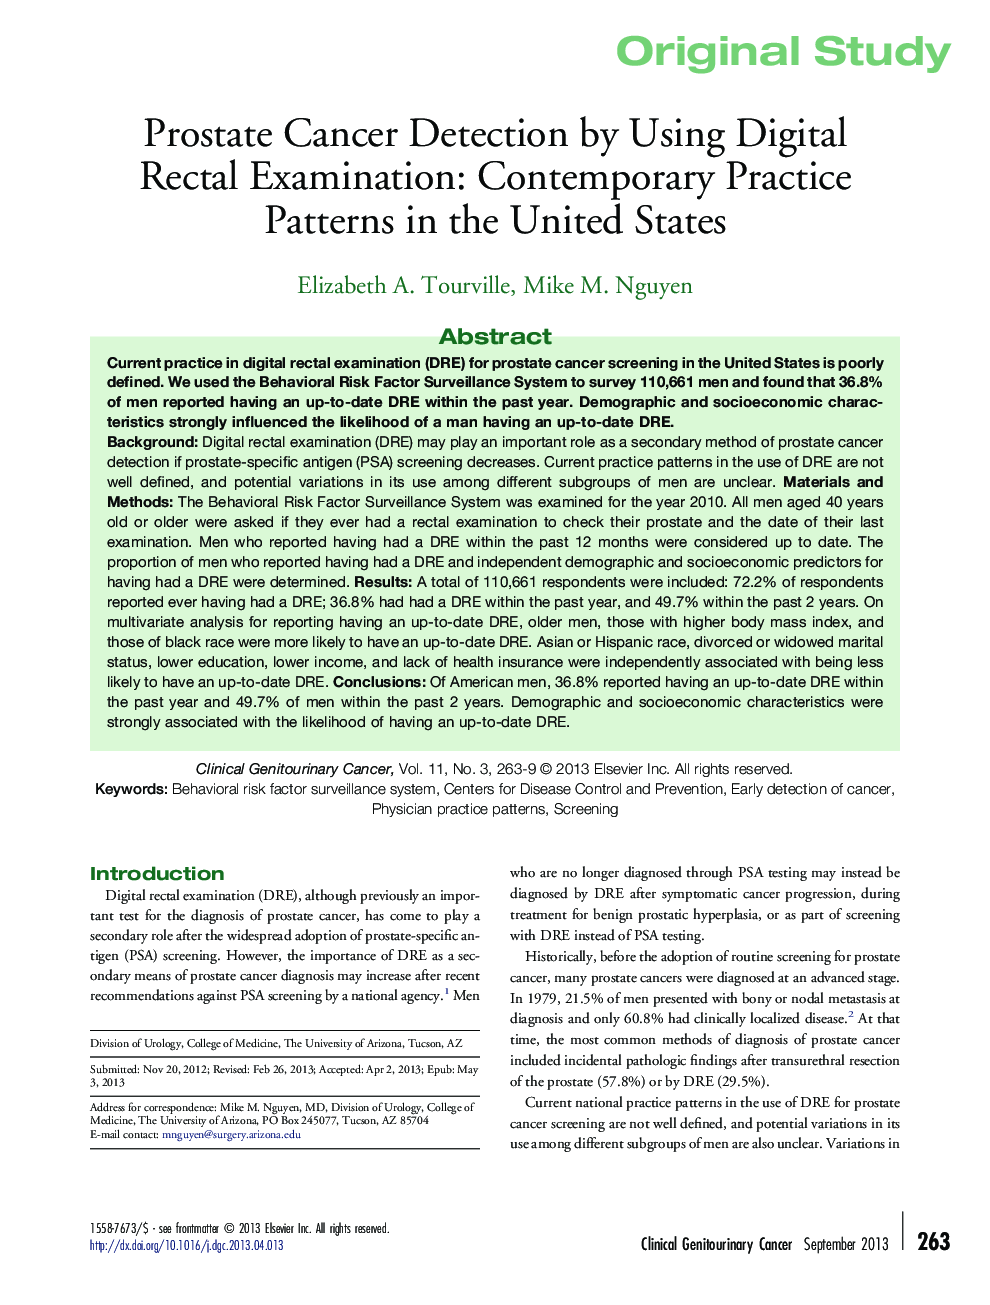 Prostate Cancer Detection by Using Digital Rectal Examination: Contemporary Practice Patterns in the United States